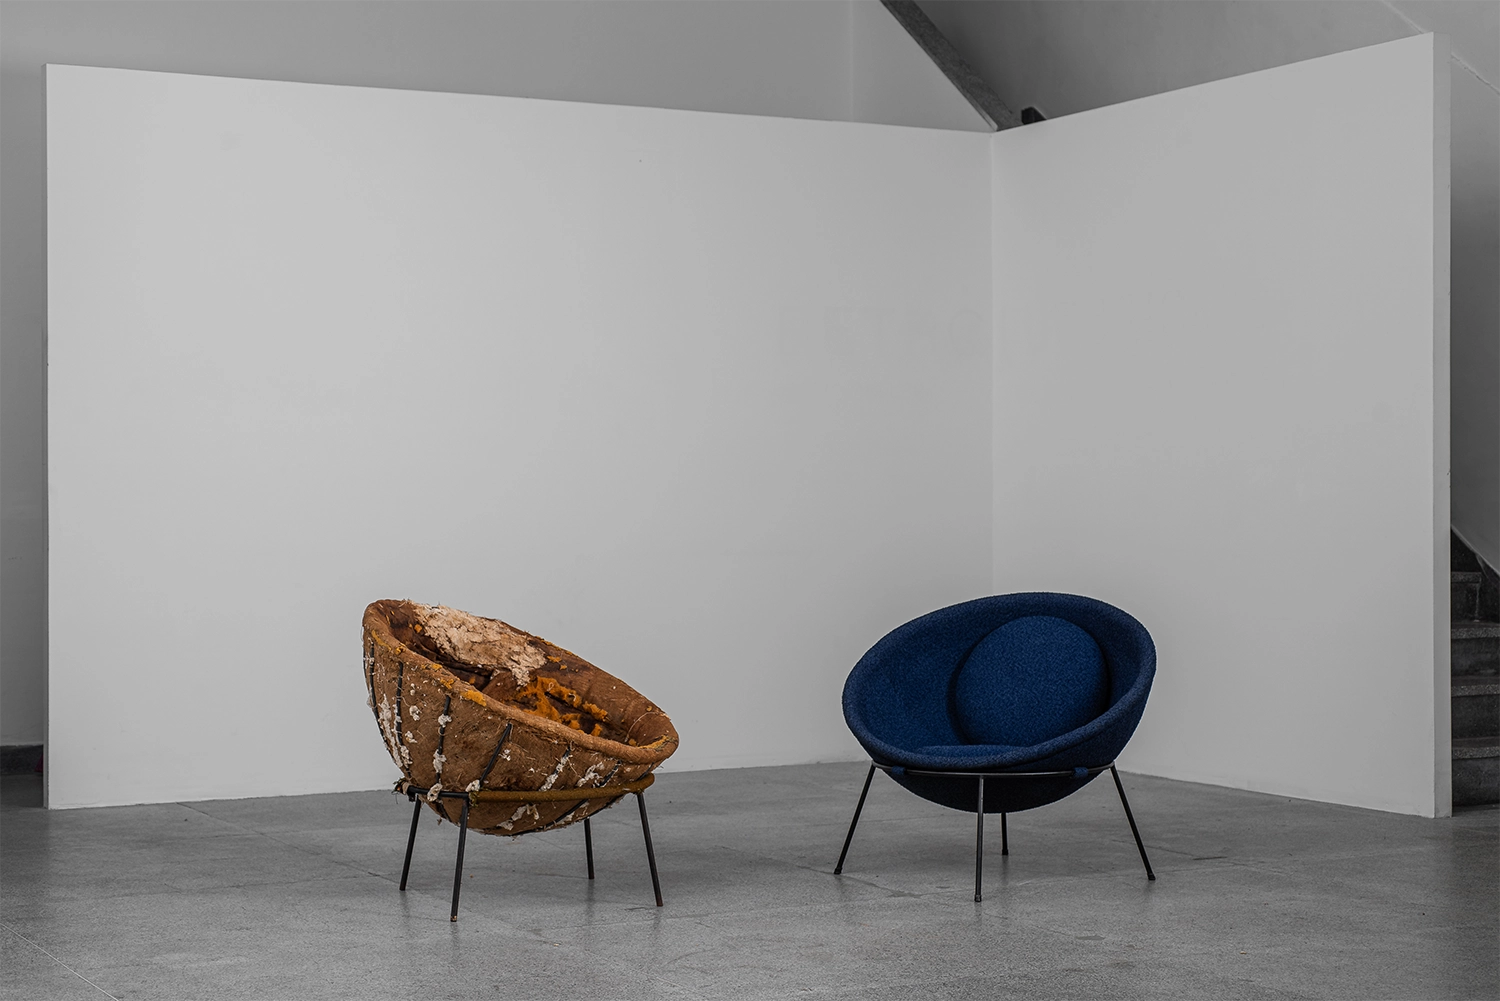 Bowl chair first model and Bowl chair 1950s by Lina Bo Bardi at Diletante42. Image courtesy of Diletante42